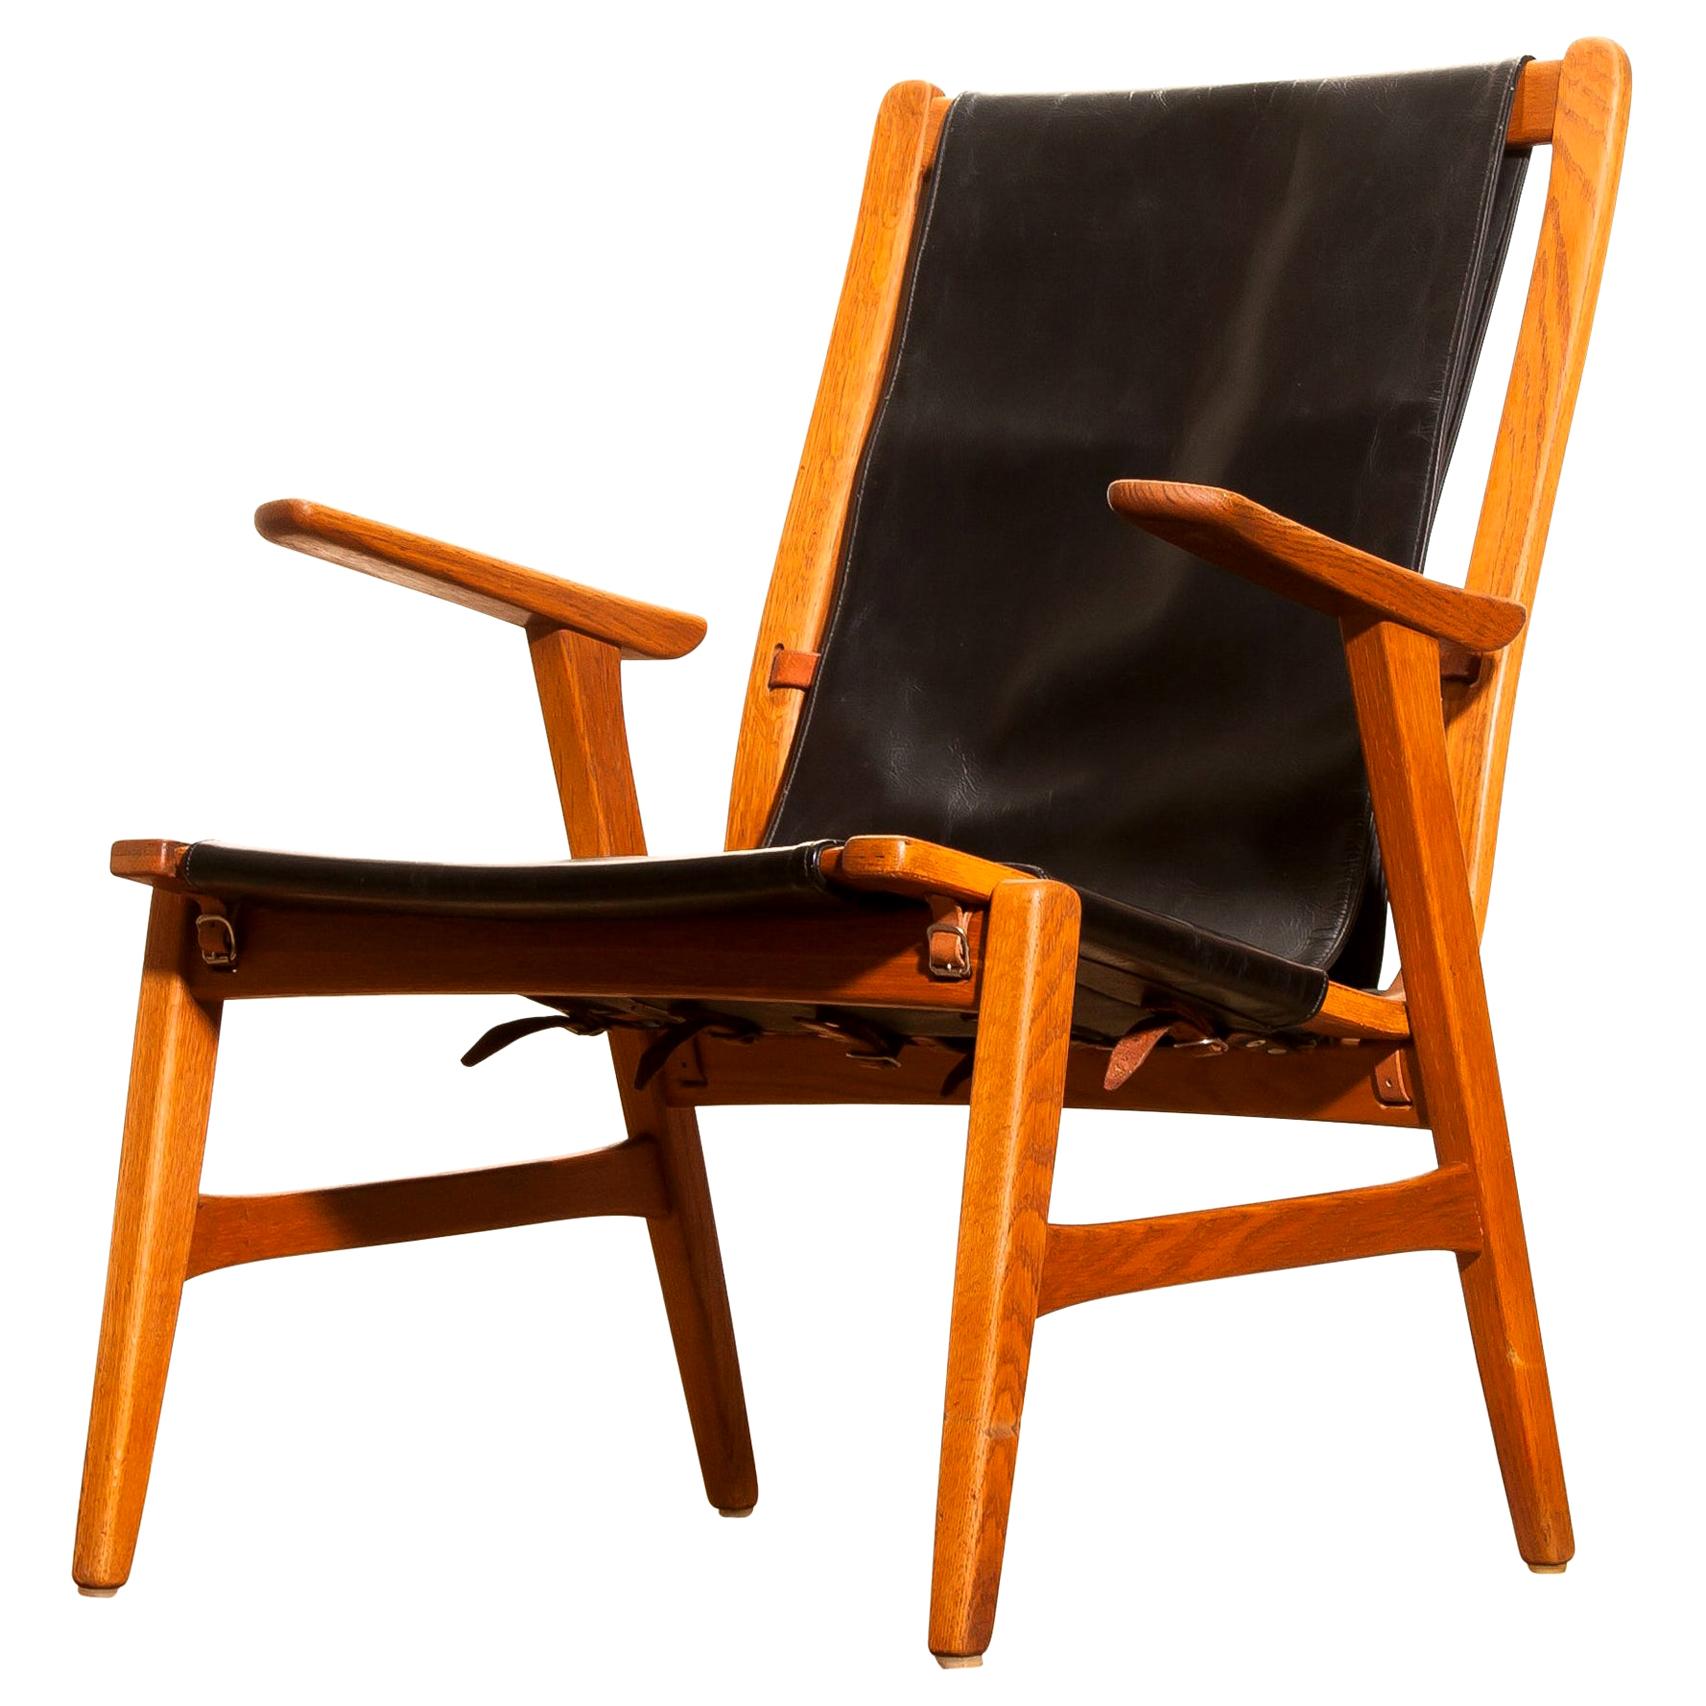 Wonderful hunting chair 'Ulrika' designed by Östen Kristiansson for Vittsjö, Sweden.
This beautiful chair is made of an oak frame with a black leatherette seating.
It is in very nice condition,
Period: 1950s.
Dimensions: H 82 cm, W 62 cm, D 60